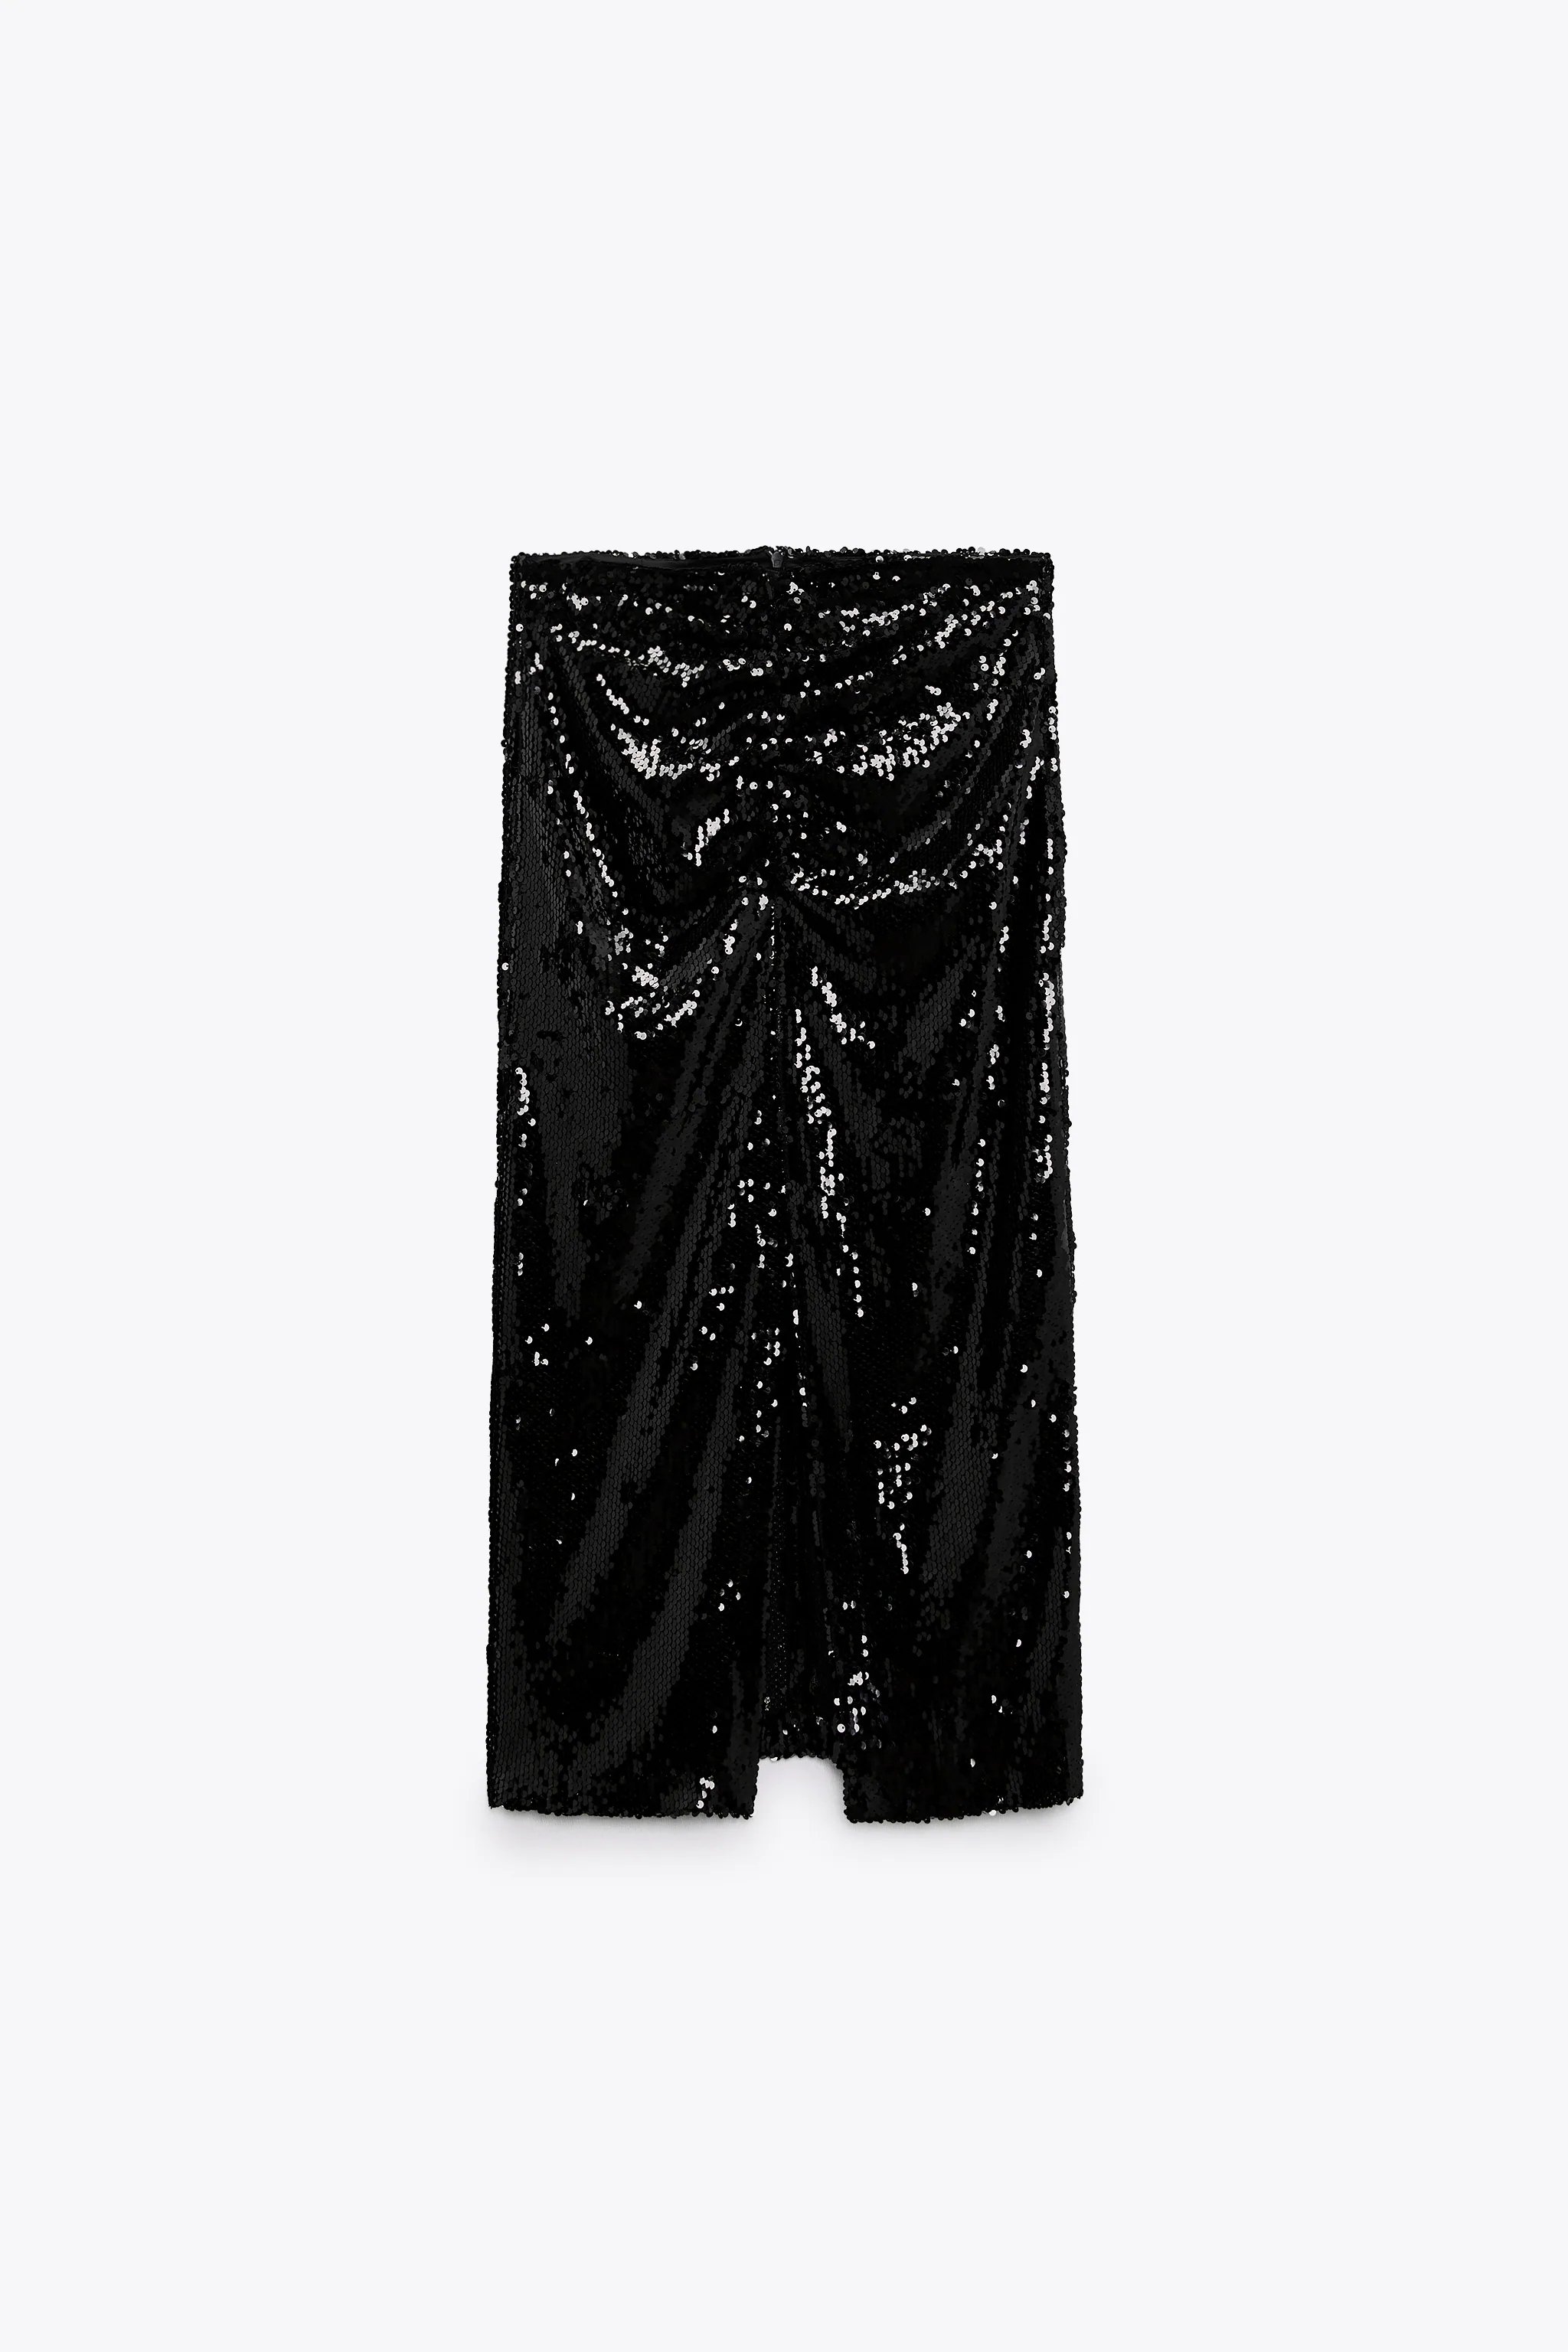 6&gt; Zara Sequin Skirt with Front Gathered Detail €39.95